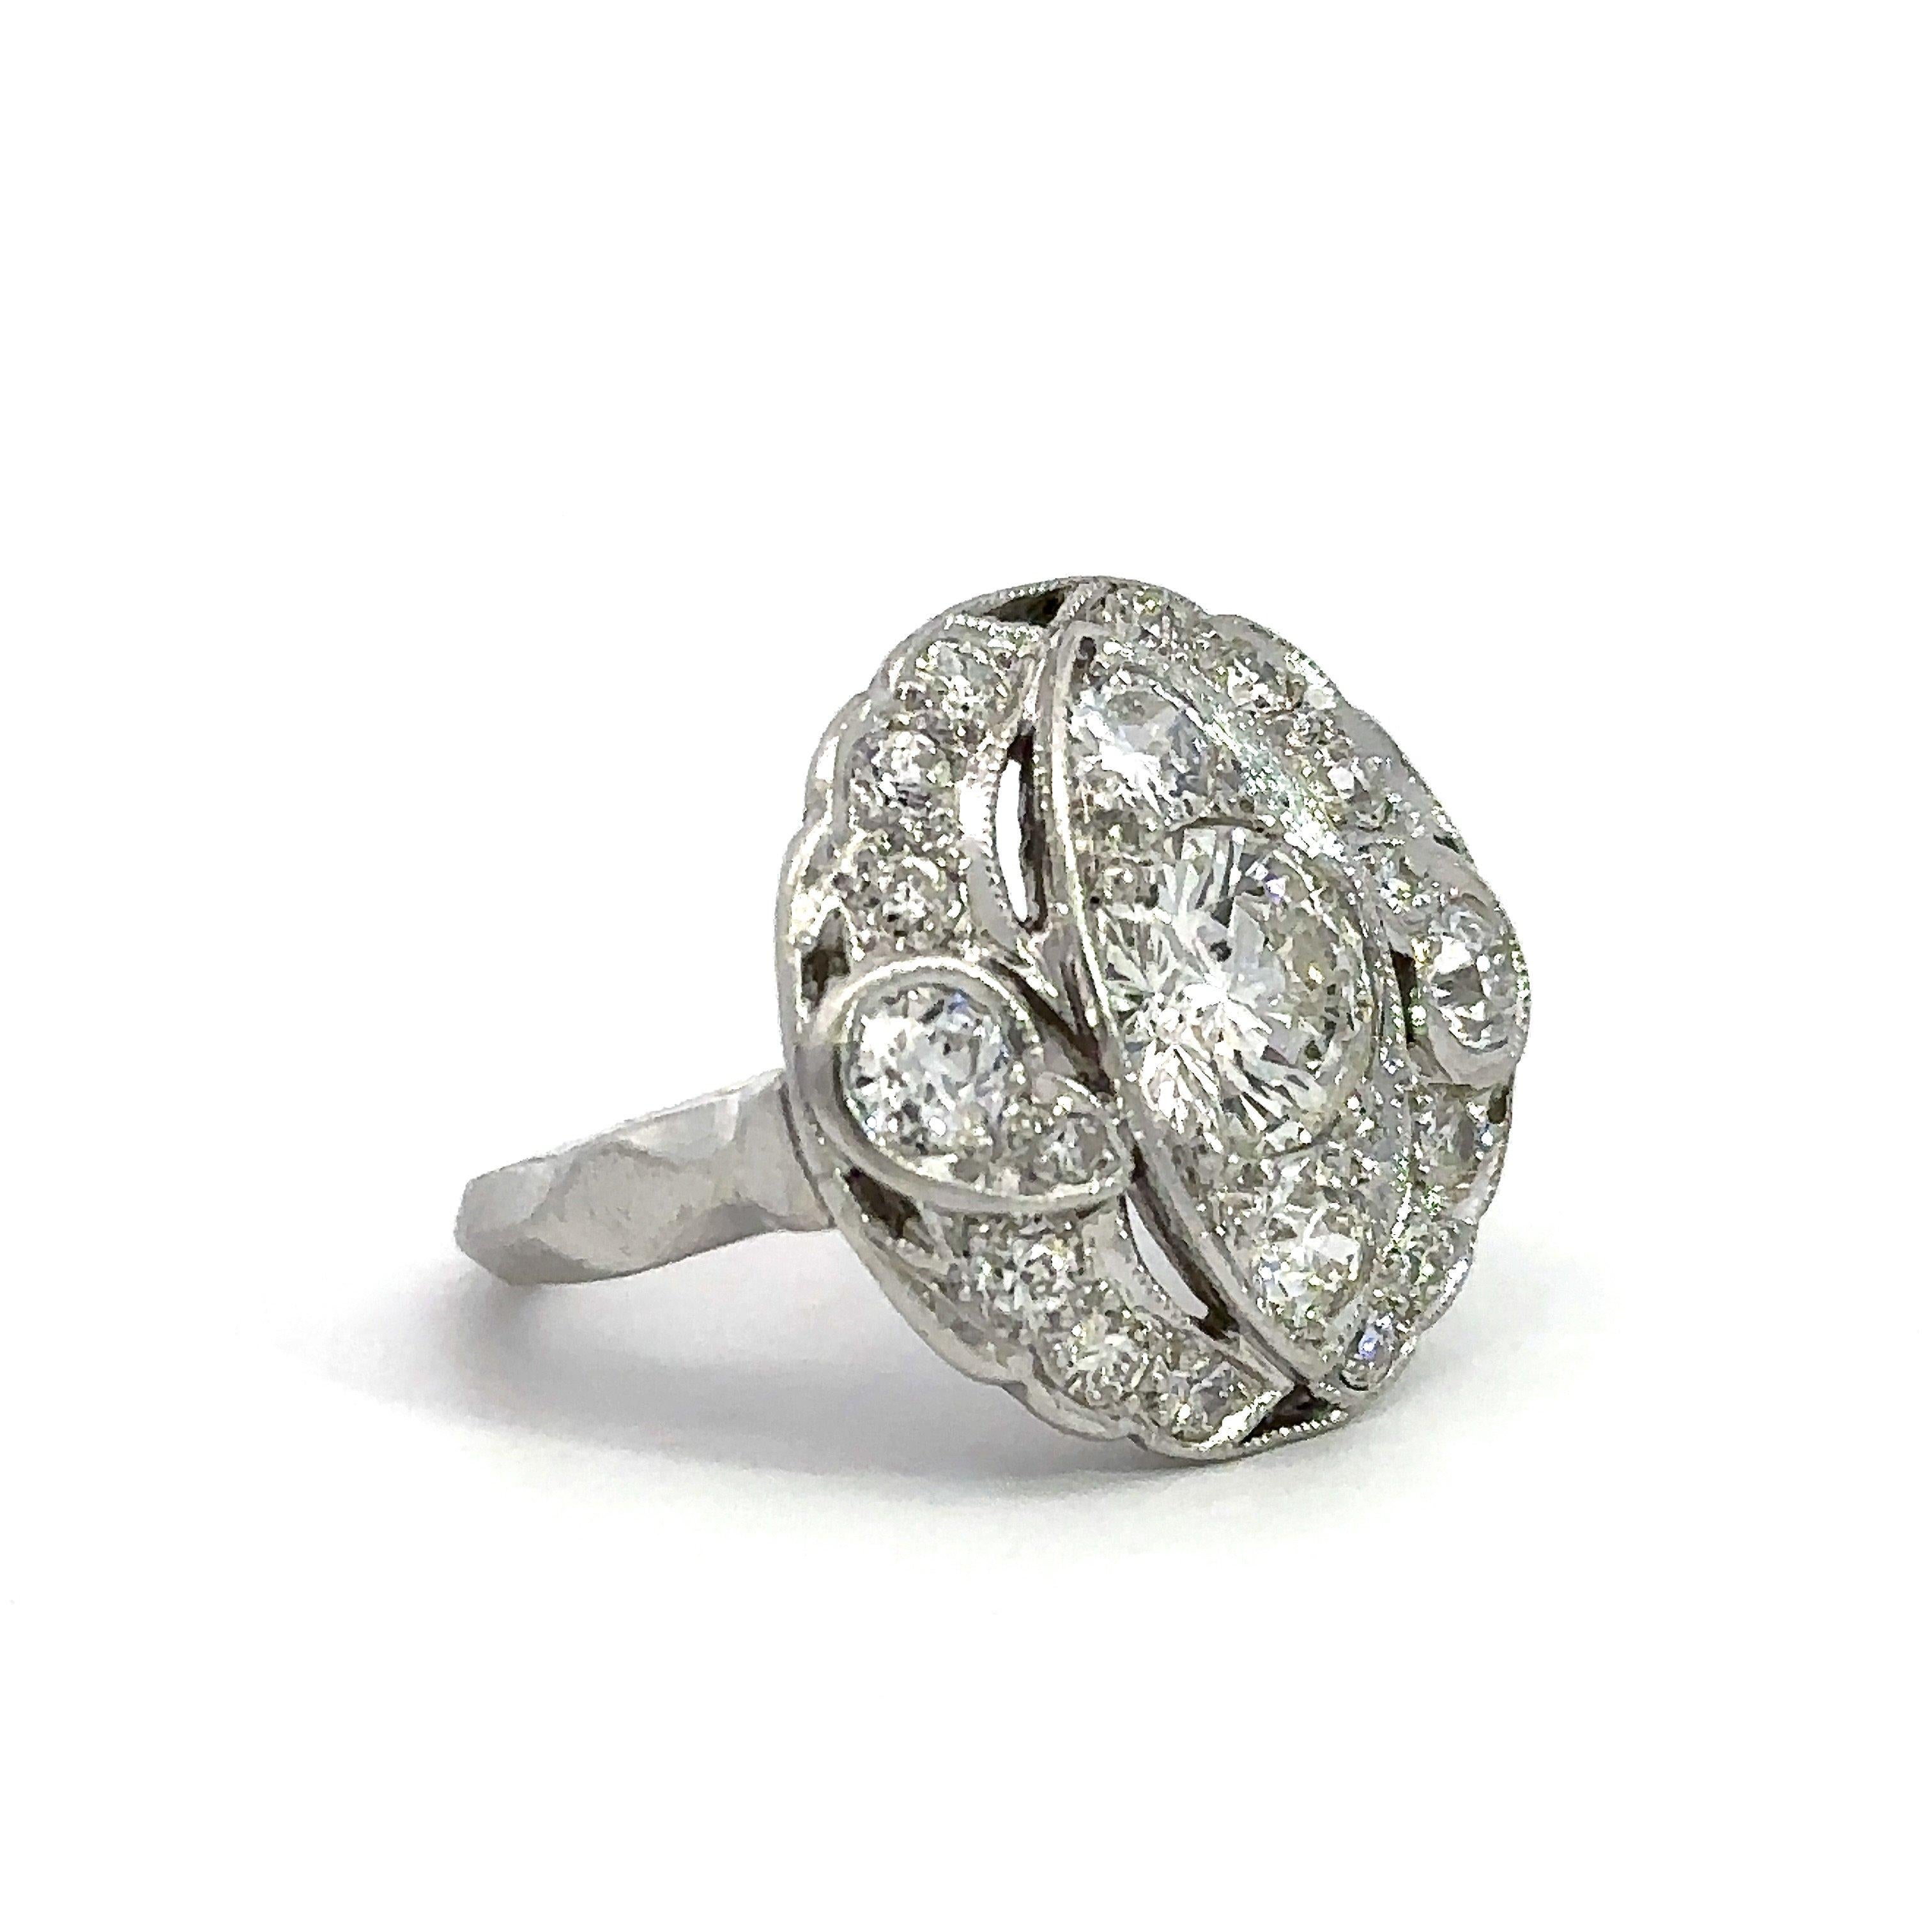 This vintage diamond cocktail ring, also called a dinner ring, dates from the late-1940's. It is crafted in platinum with one round 1.15CT center diamond with some warmth to the color (K Color) and imperfect clarity. The center diamond is surrounded